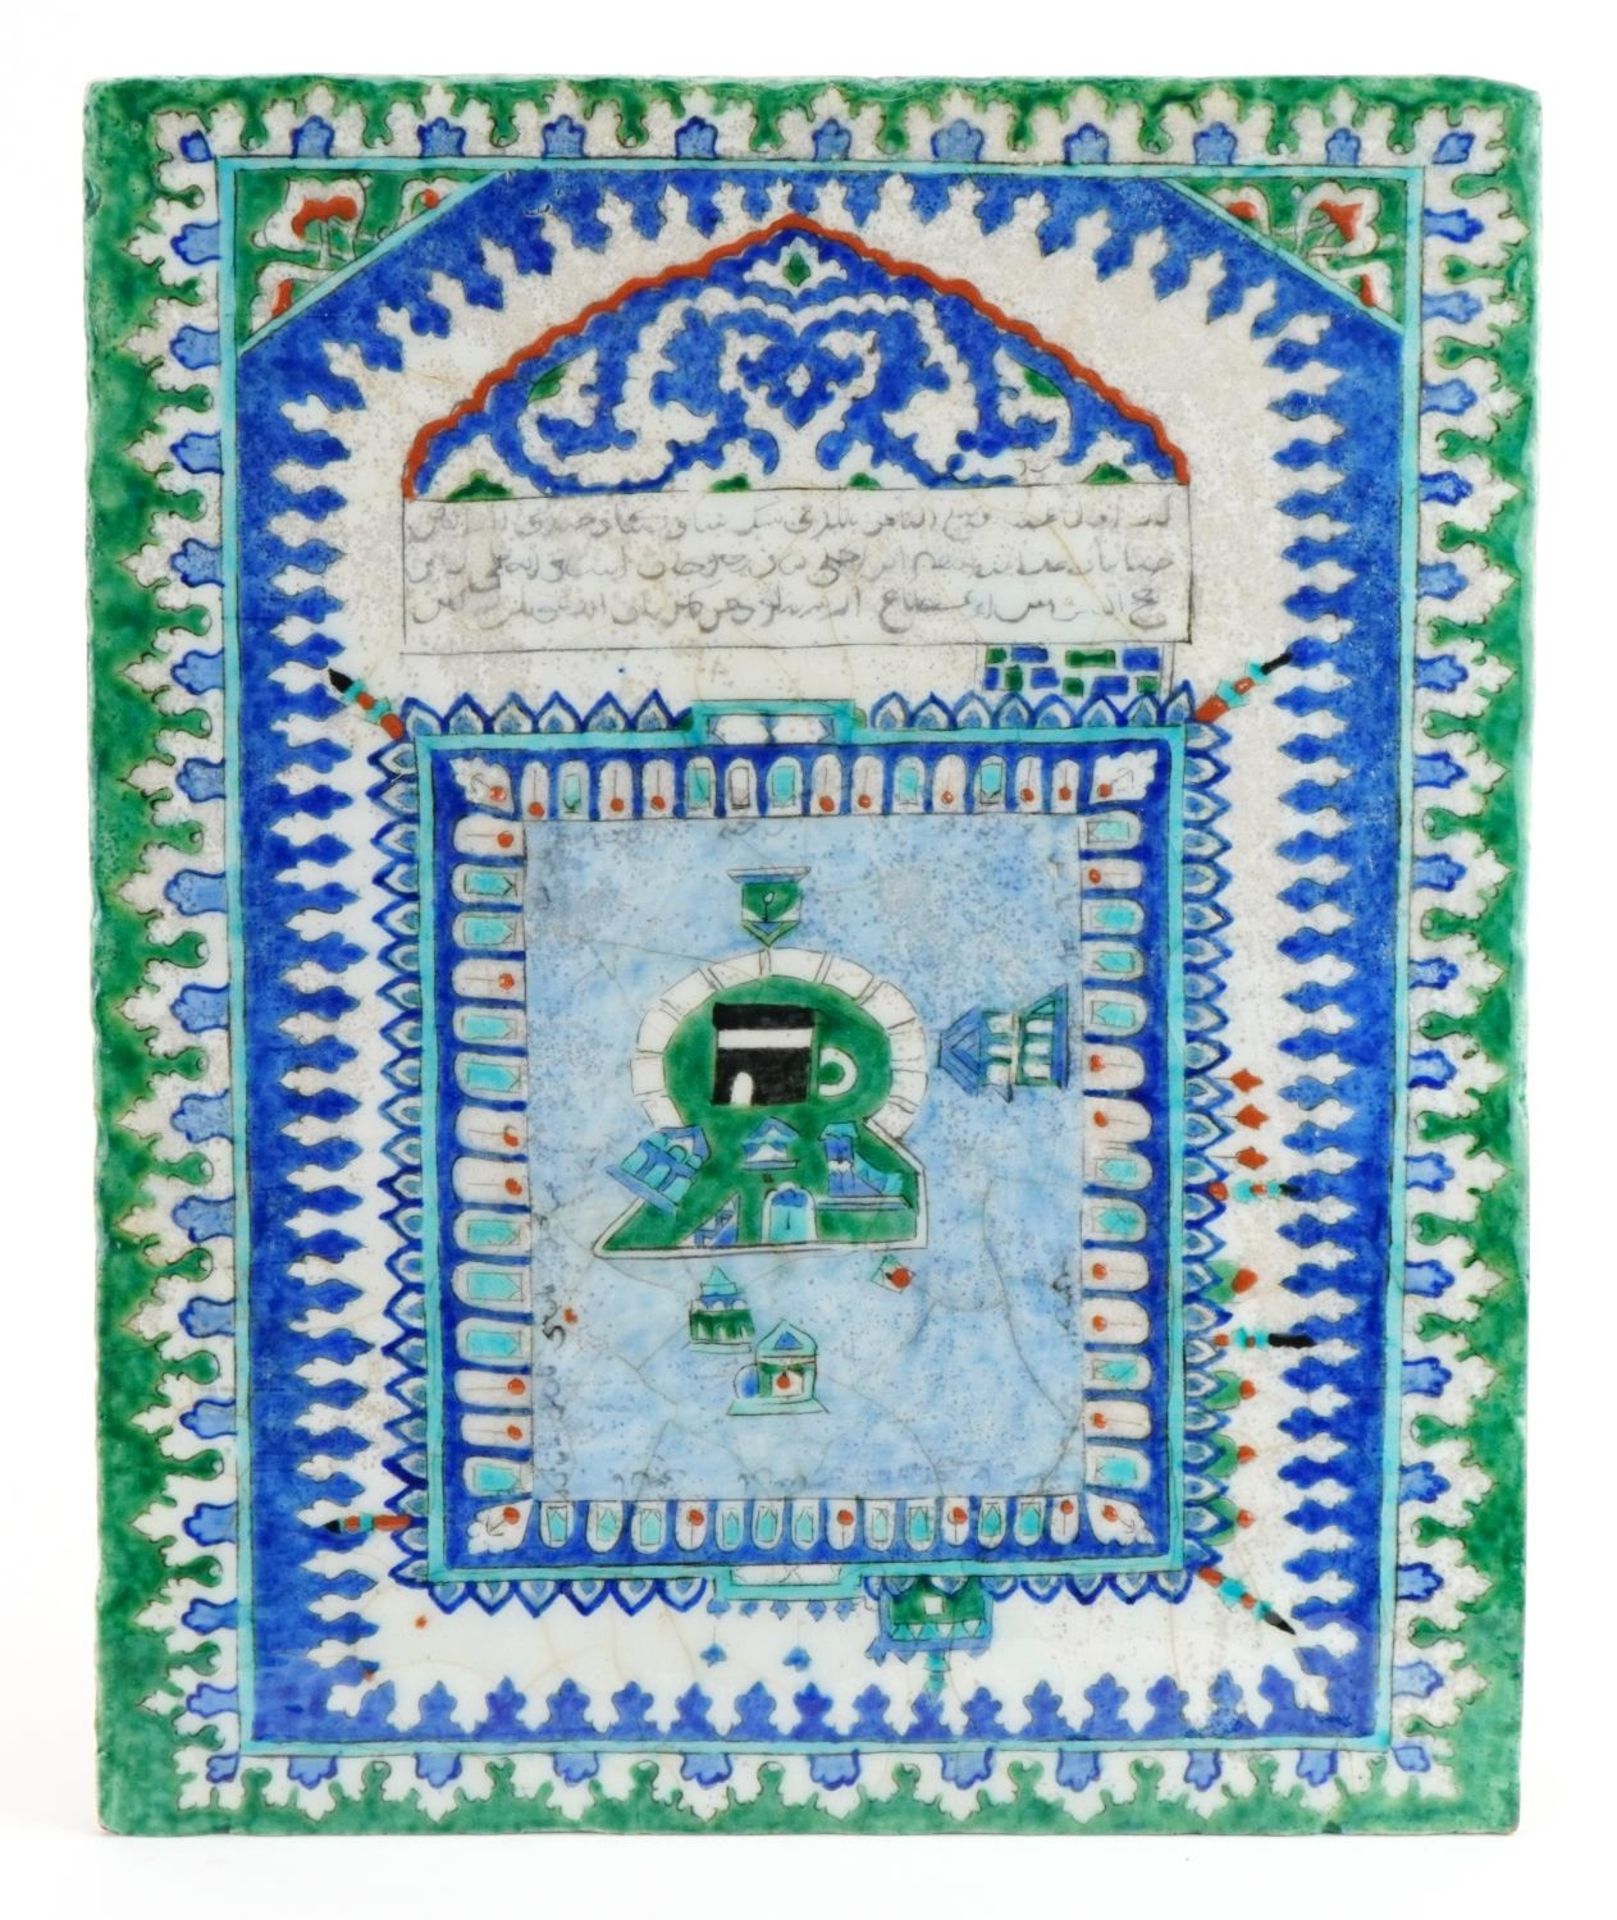 Turkish Ottoman Iznik Mecca tile with calligraphy, 33cm x 27cm : For further information on this lot